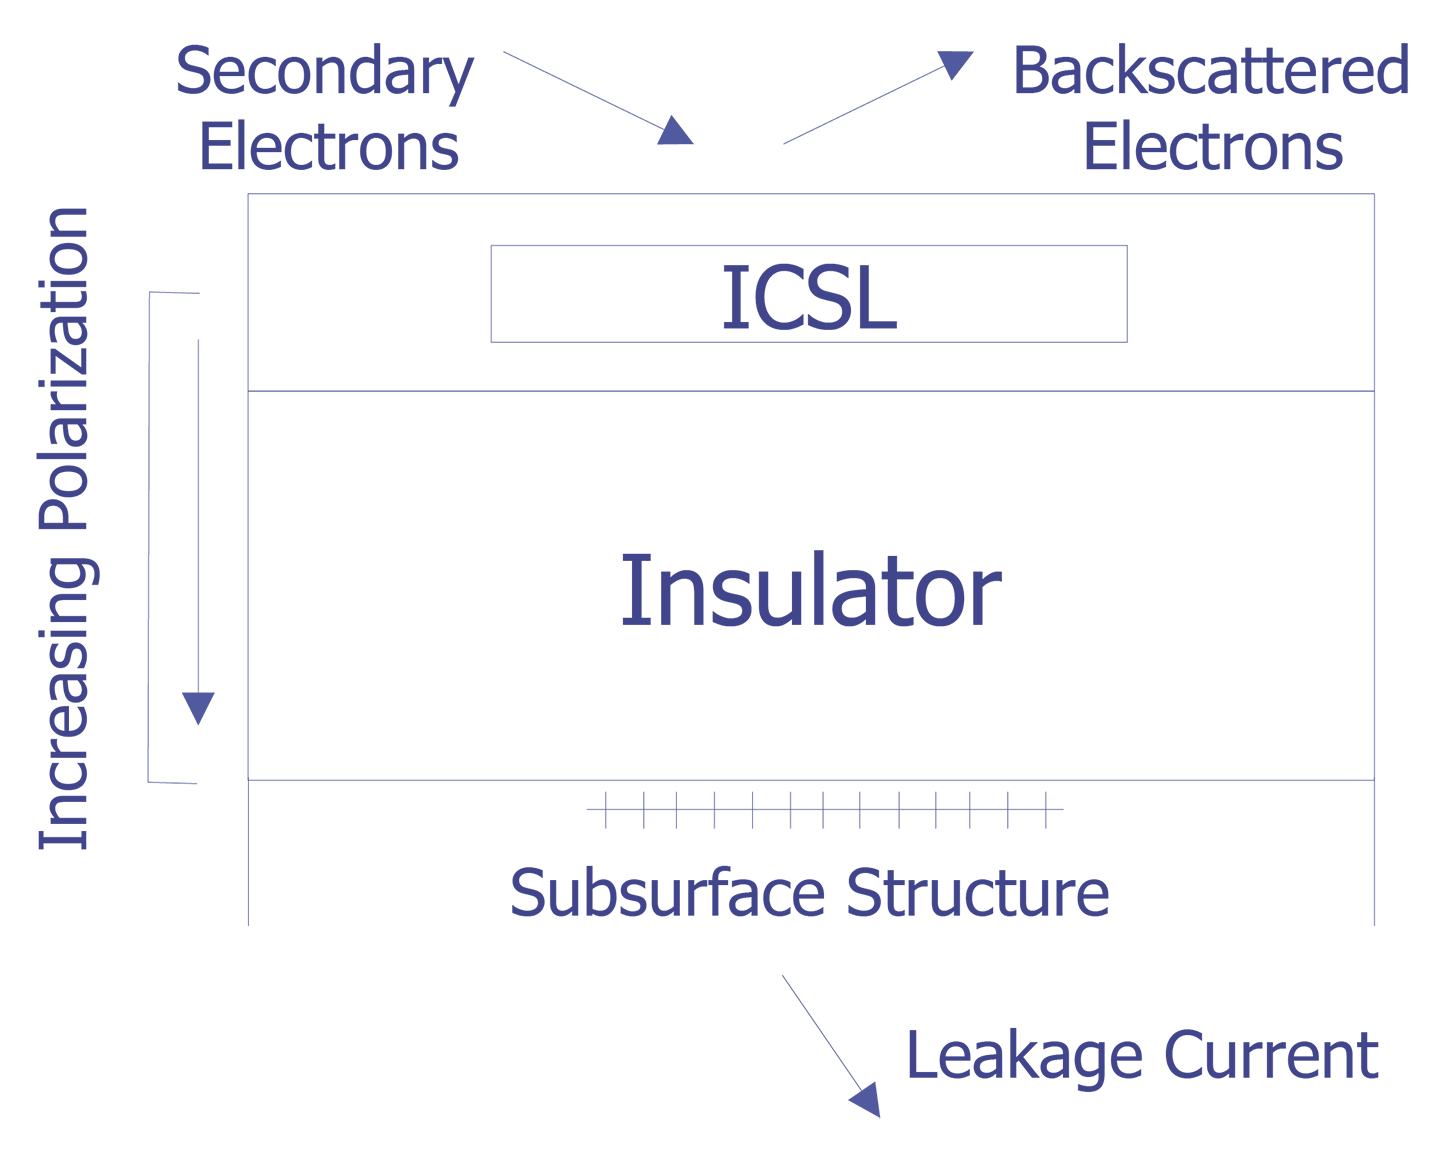 Polarization of the insulating passivation between the induced conductive surface layer (ICSL) and a subsurface structure.